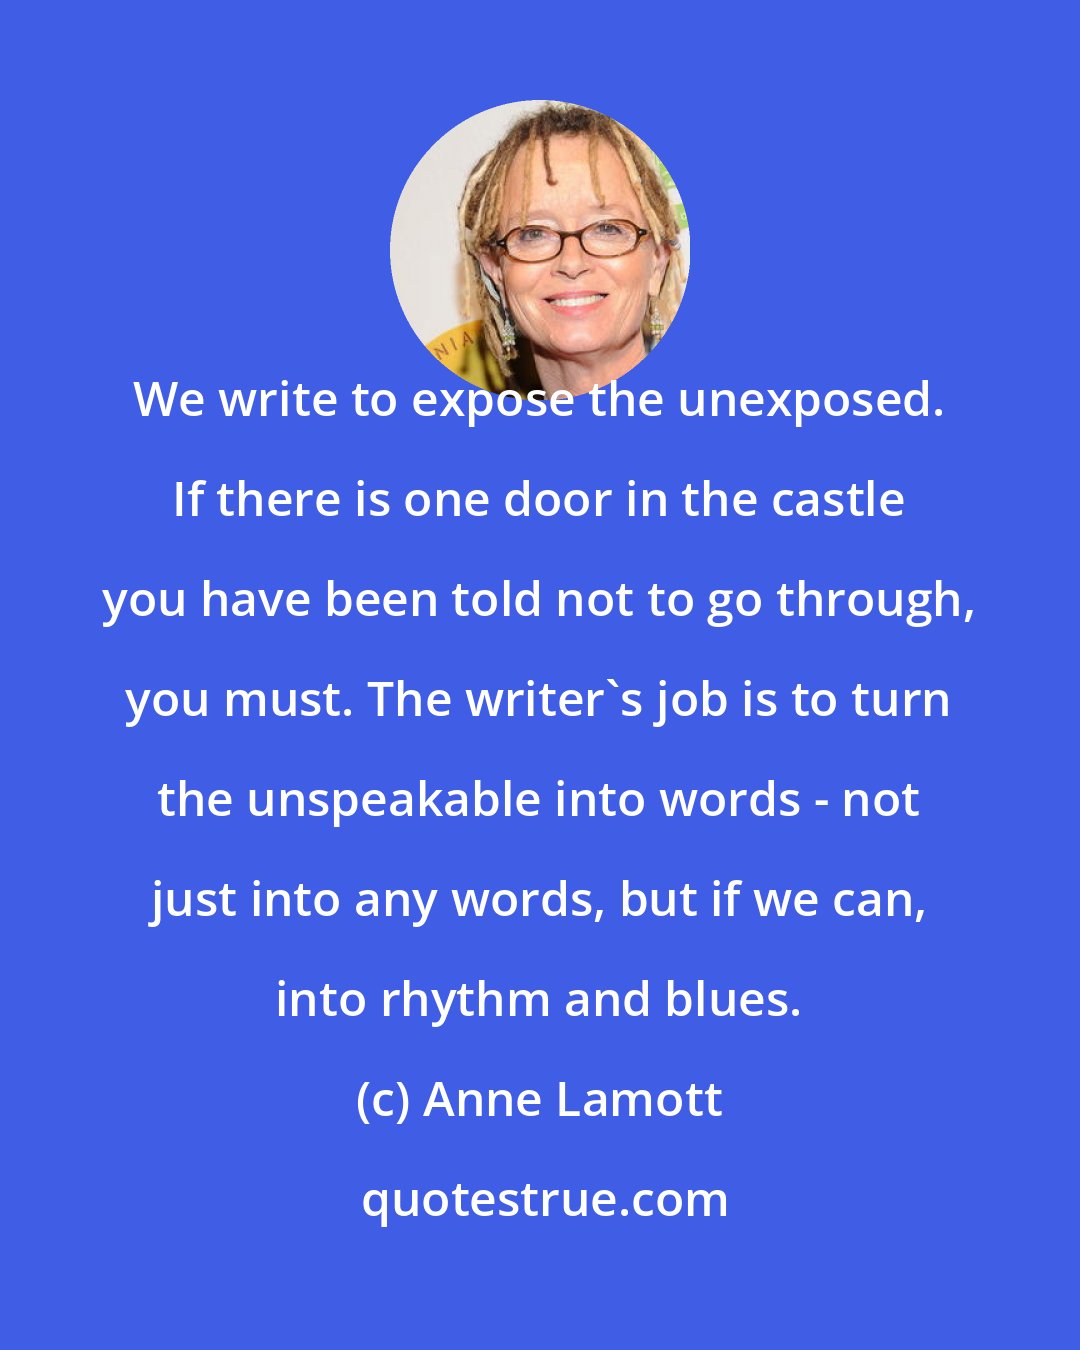 Anne Lamott: We write to expose the unexposed. If there is one door in the castle you have been told not to go through, you must. The writer's job is to turn the unspeakable into words - not just into any words, but if we can, into rhythm and blues.